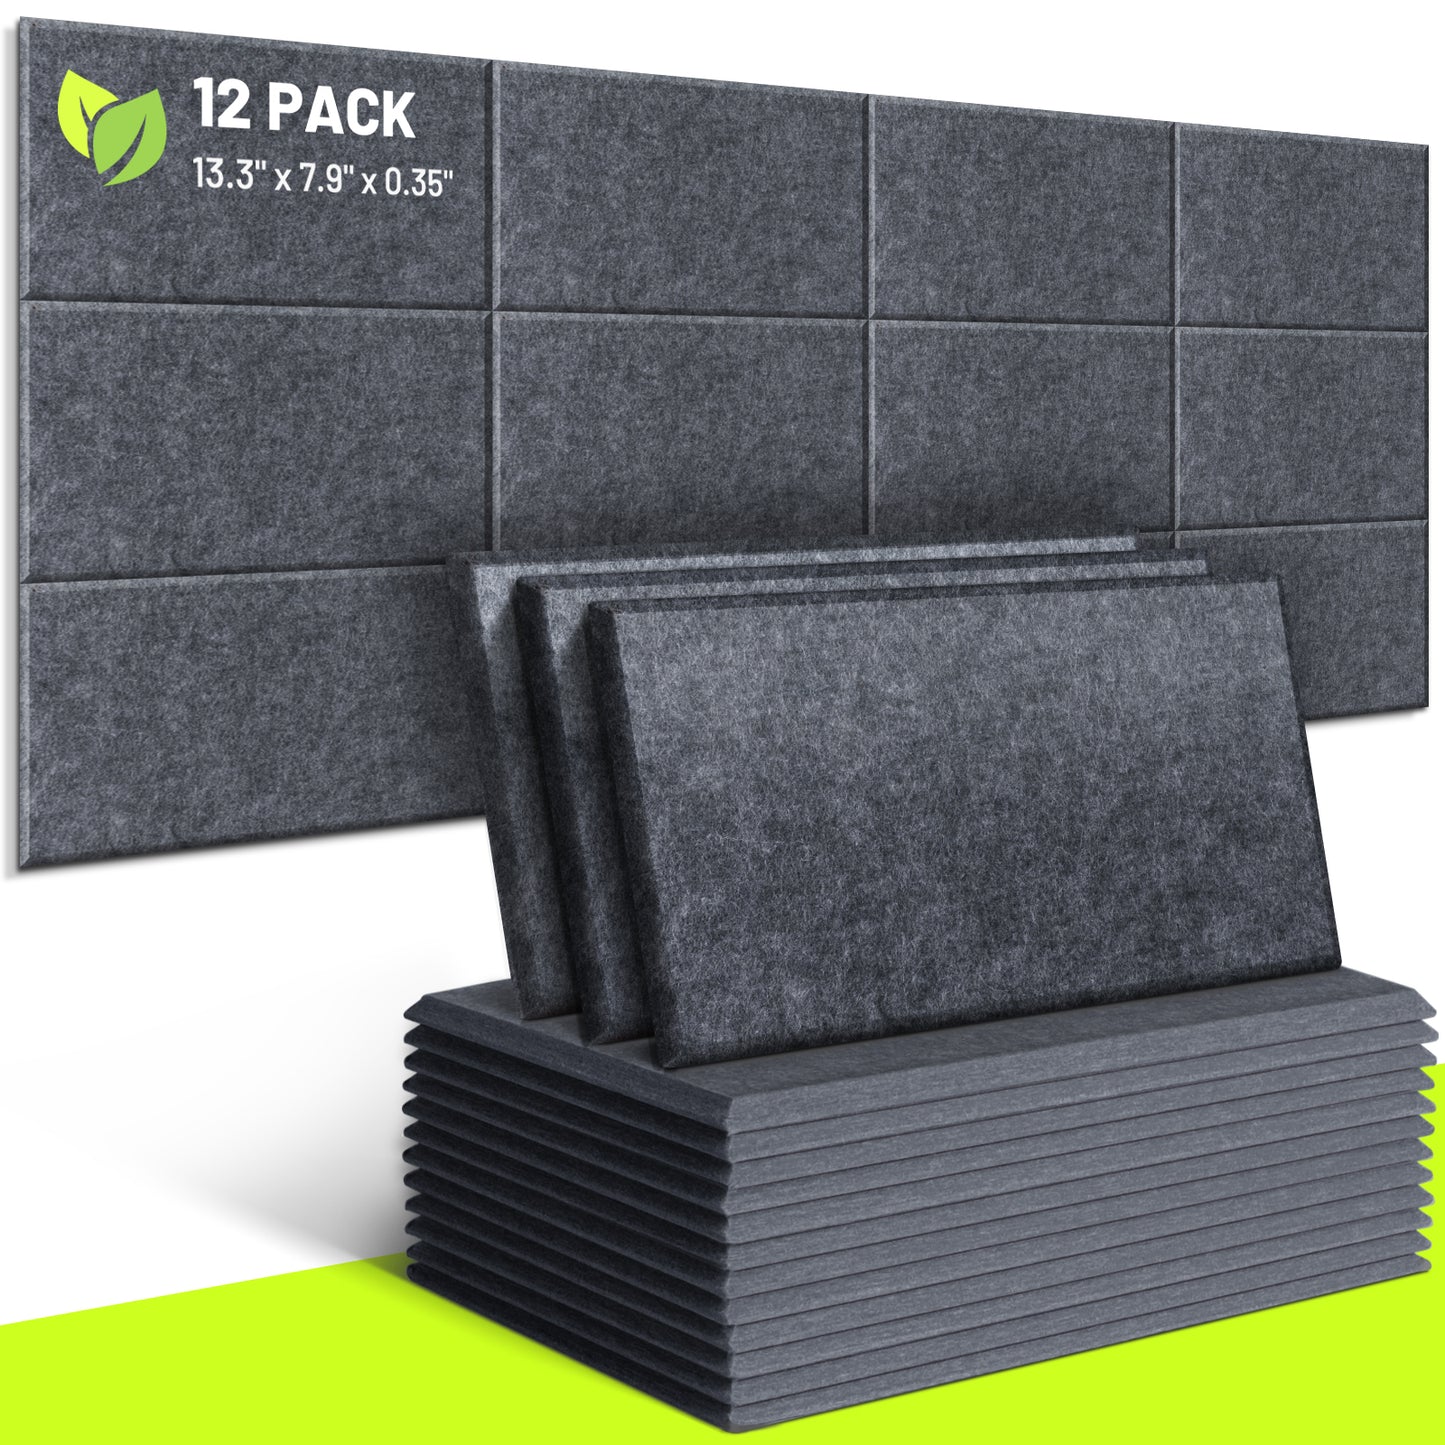 12 Pack Acoustic Panels (Non Self-Adhesive) CY0313